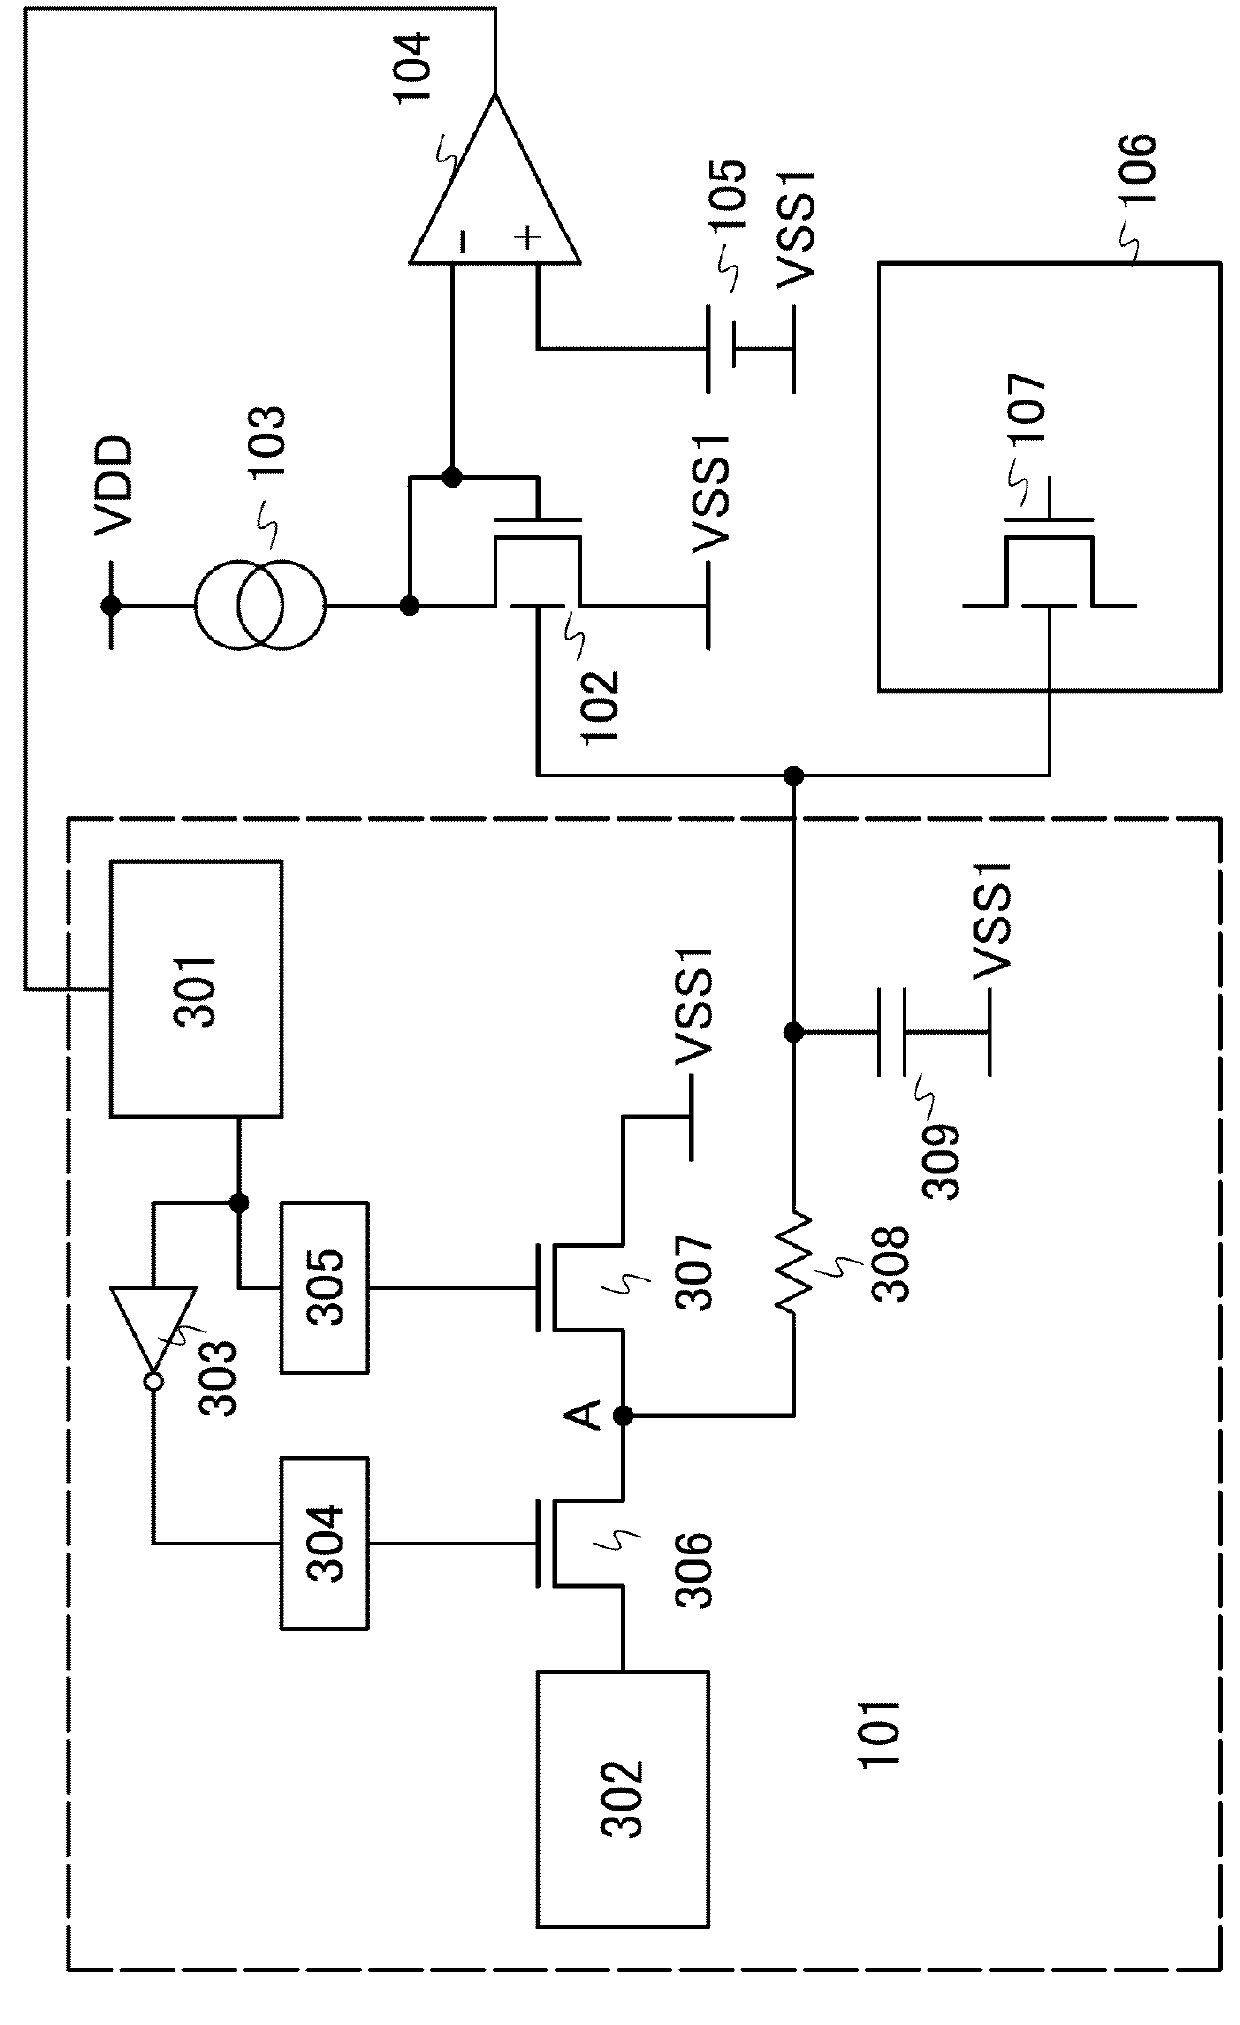 Back gate bias voltage control of oxide semiconductor transistor